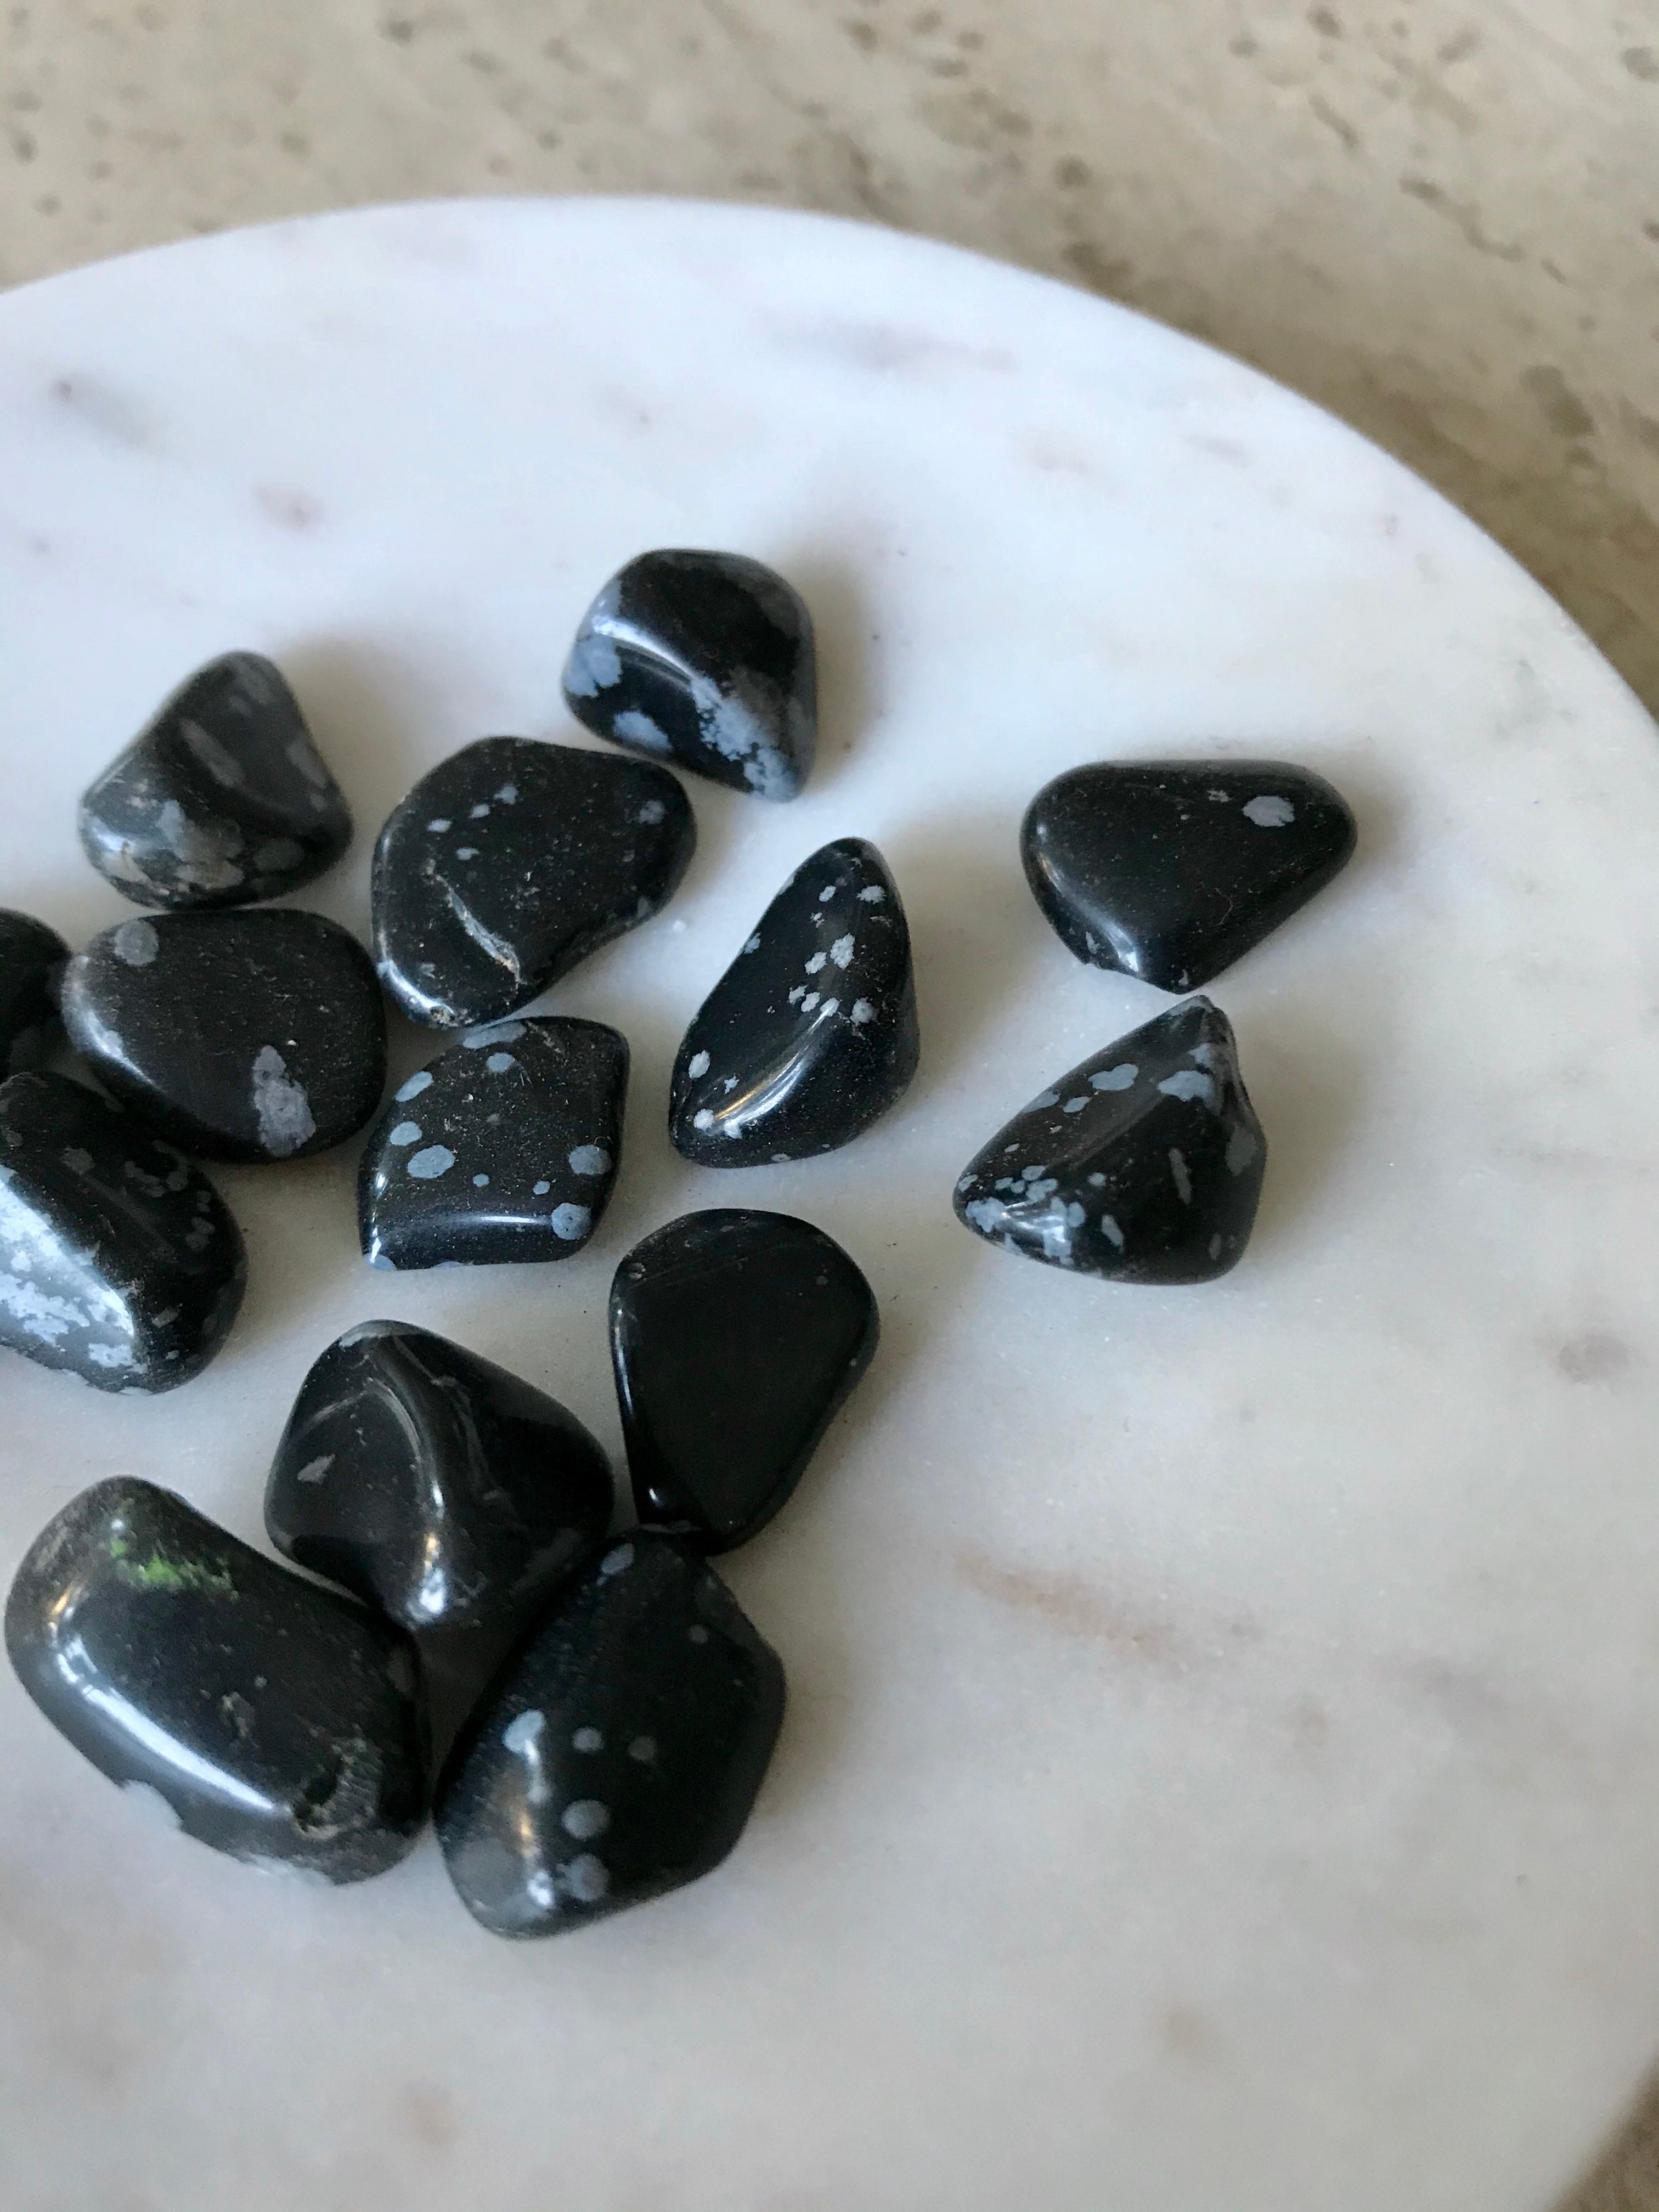 Snowflake Obsidian Crystal Stone Make Collectives